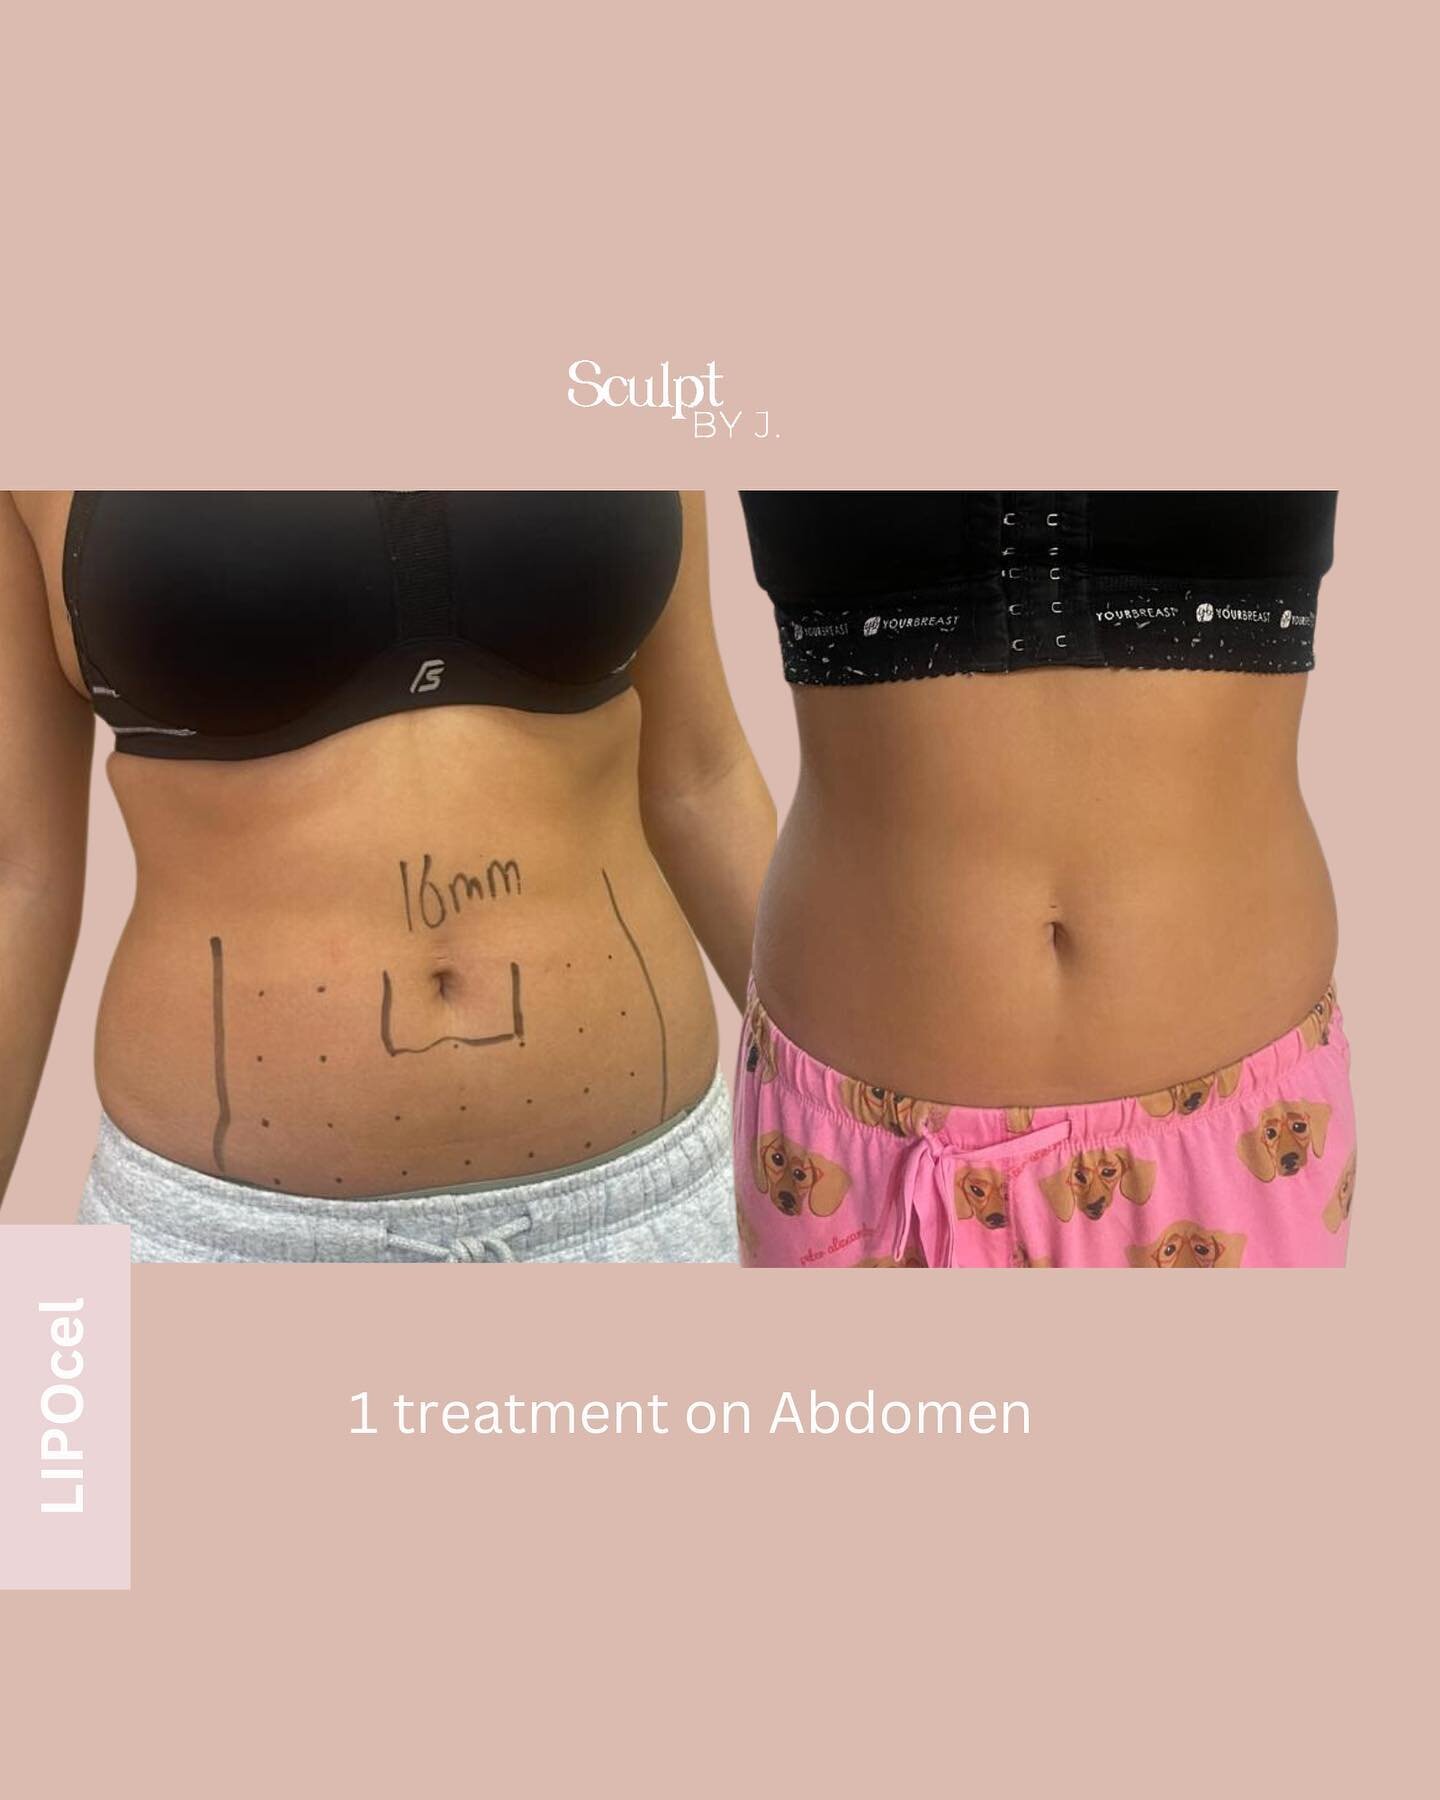 Our clients first session with the revolutionary LIPOcel 👌 the results will only get better over a 12 week period.

If you have stubborn pockets of fat that just don&rsquo;t budge no matter how much time you spend in the gym or watch what you eat, w